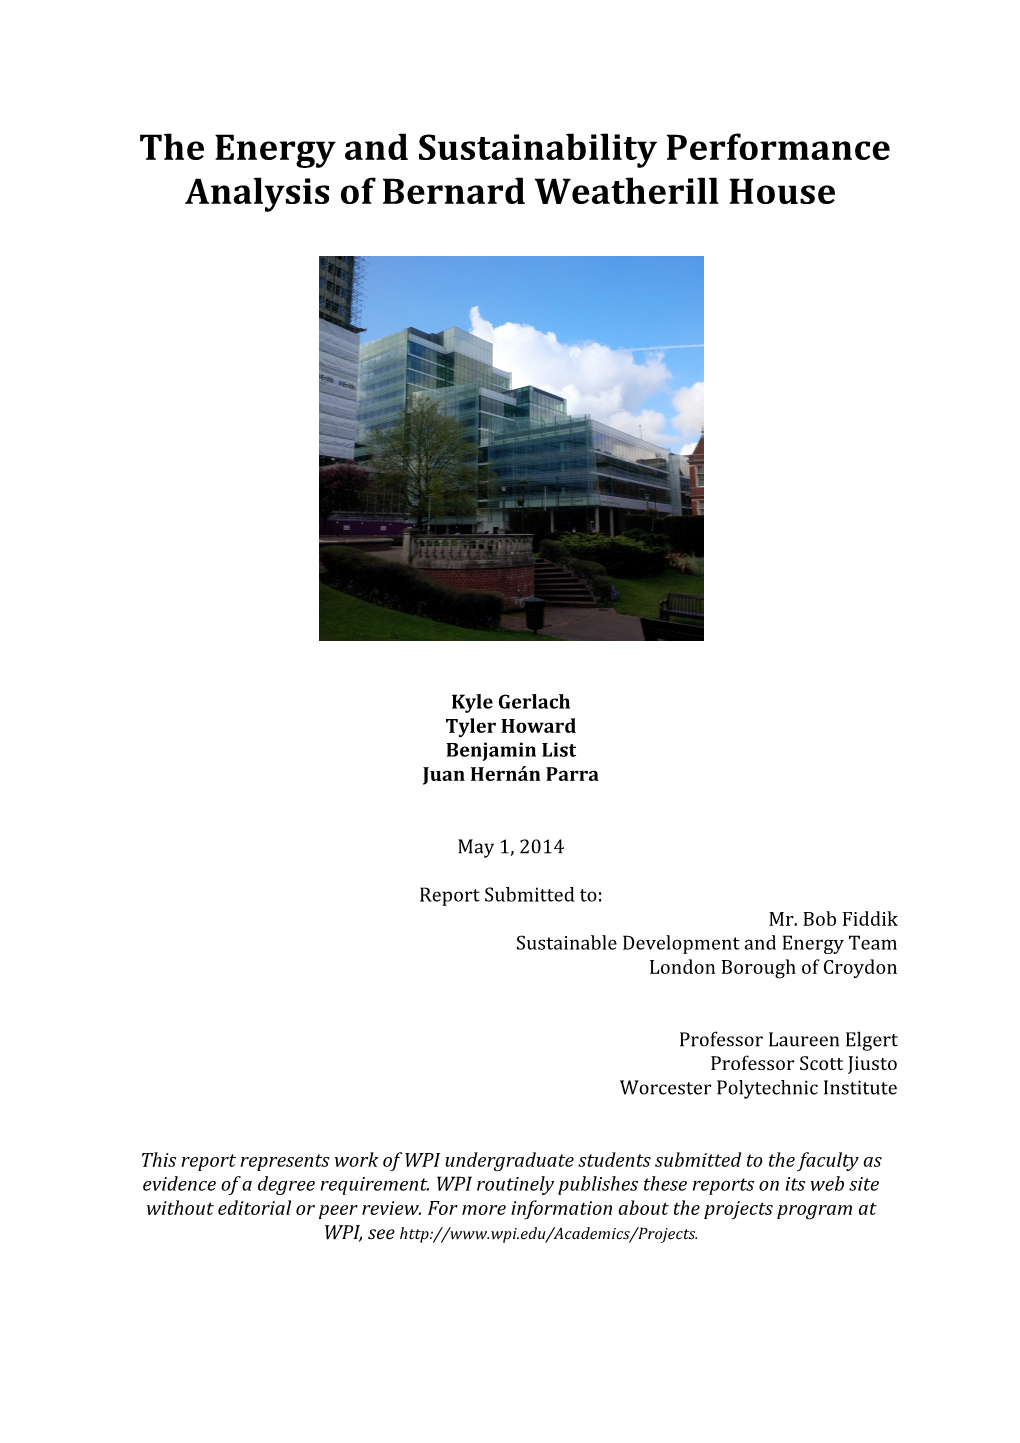 The Energy and Sustainability Performance Analysis of Bernard Weatherill House